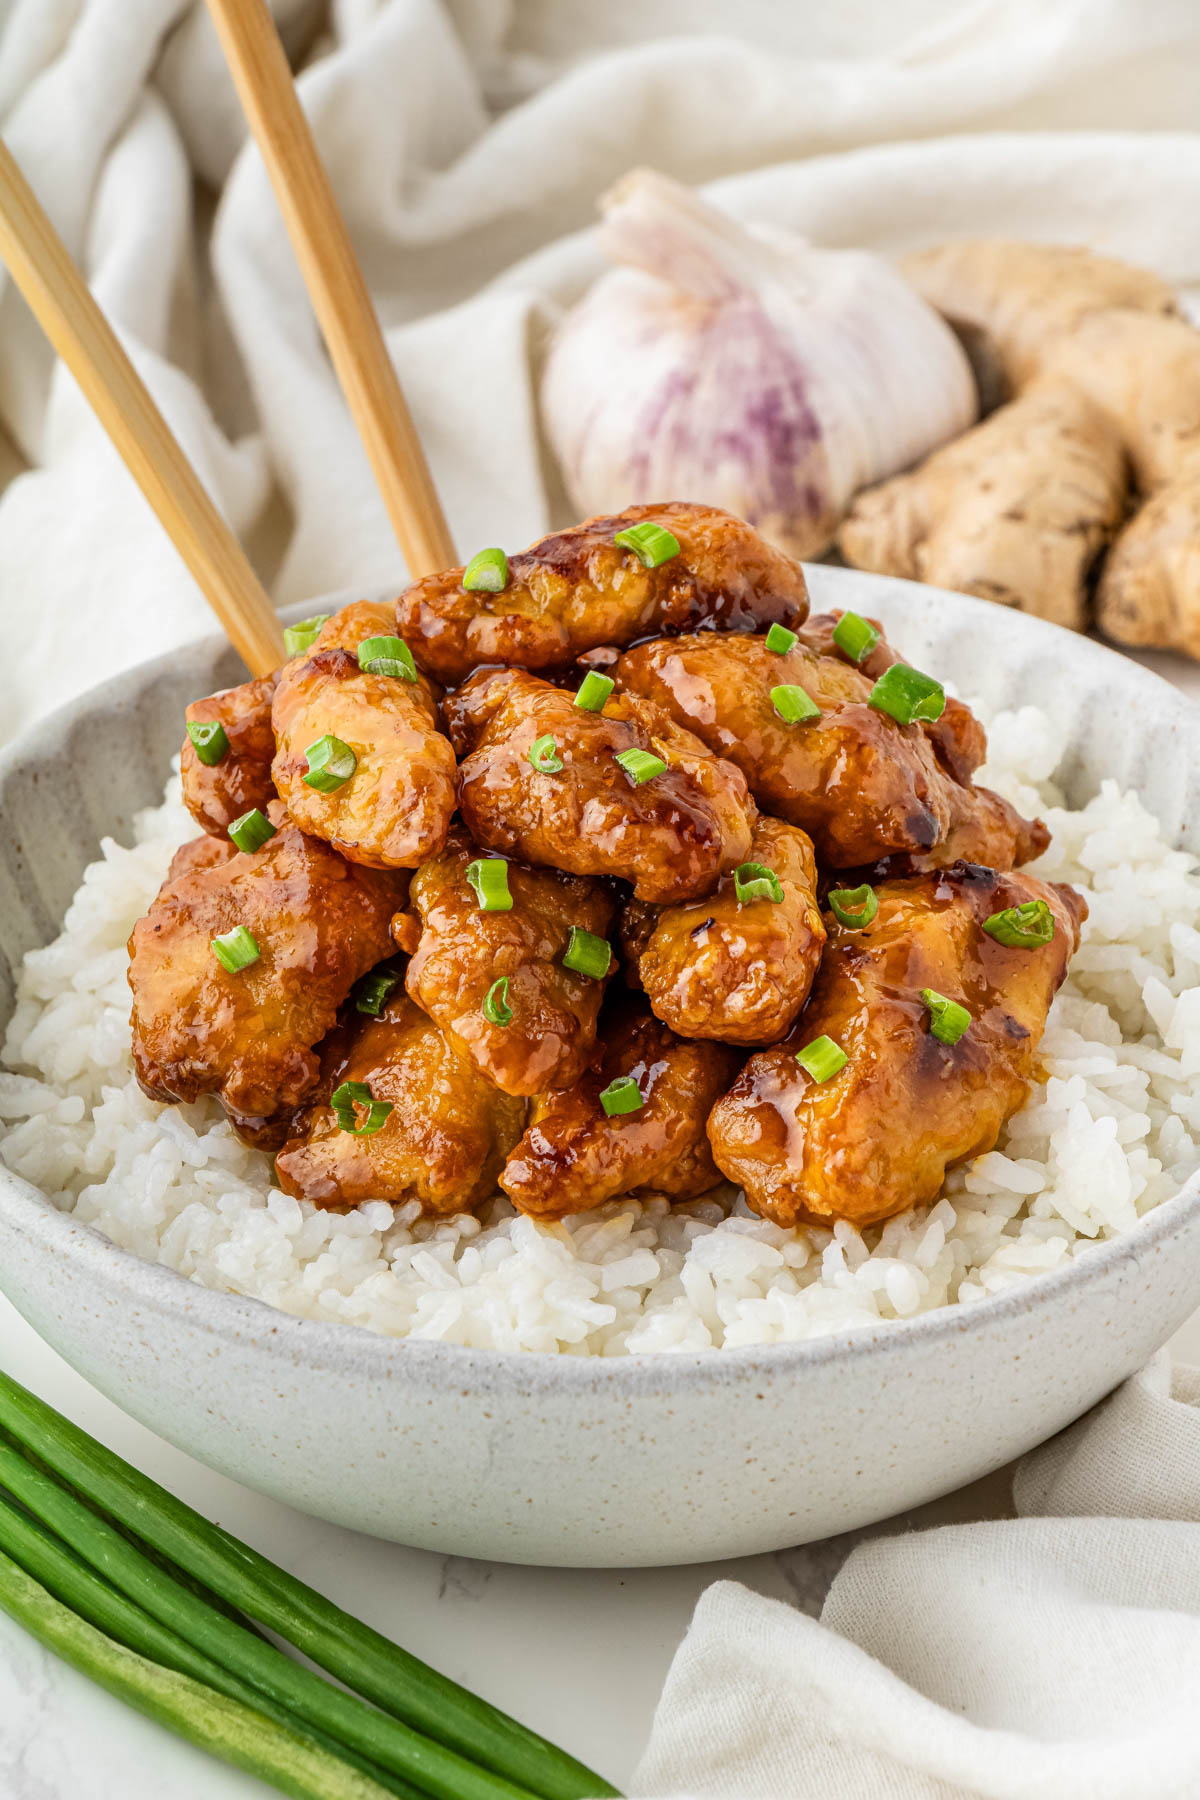 Orange Chicken on top of a bed of rice in a grey bowl with chop sticks